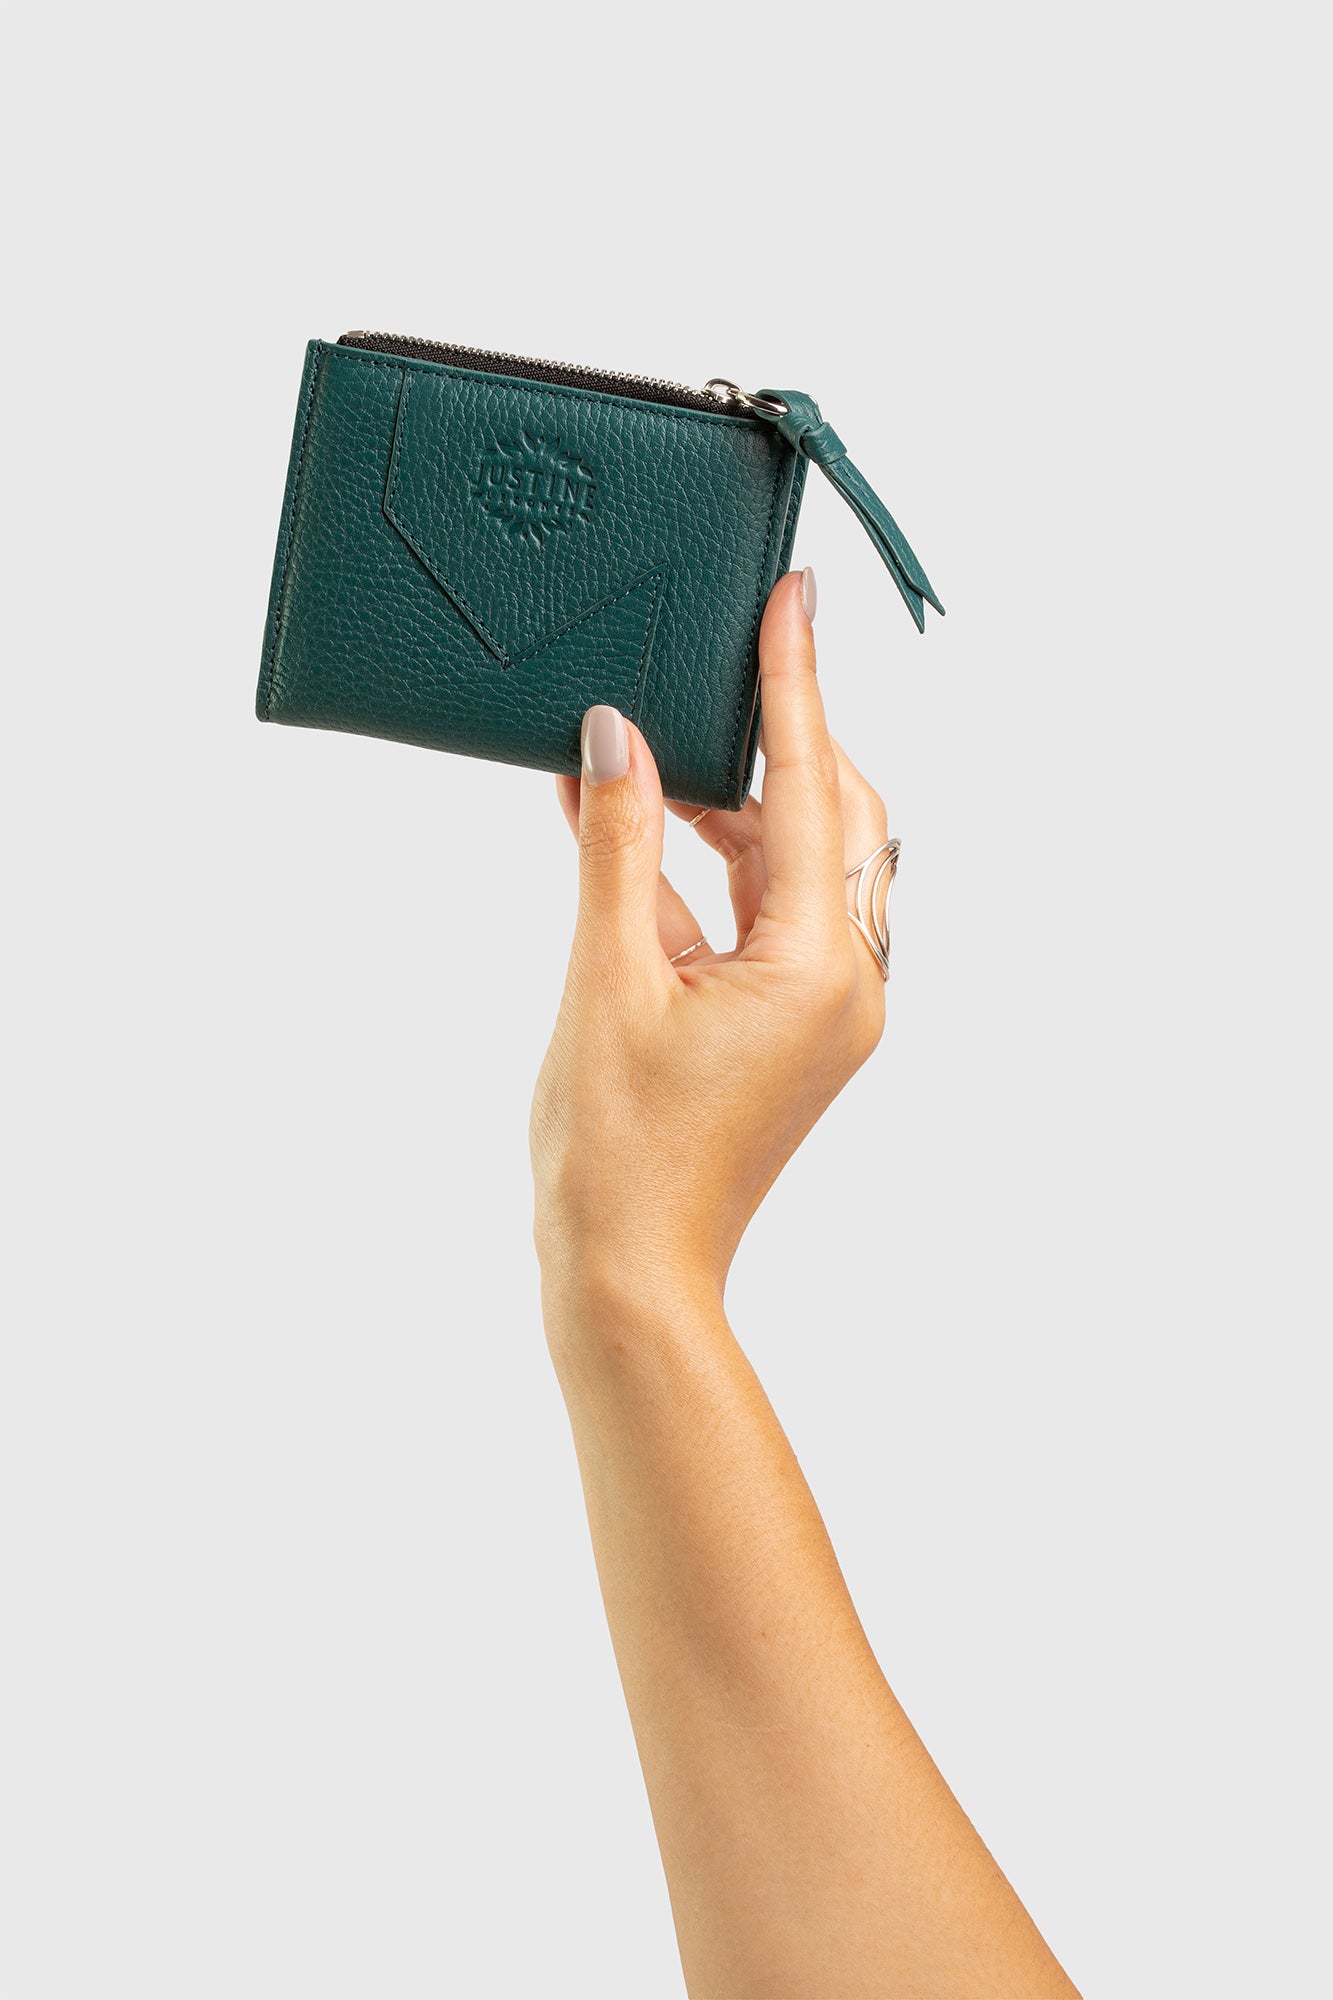 JL wallet leather - Teal green